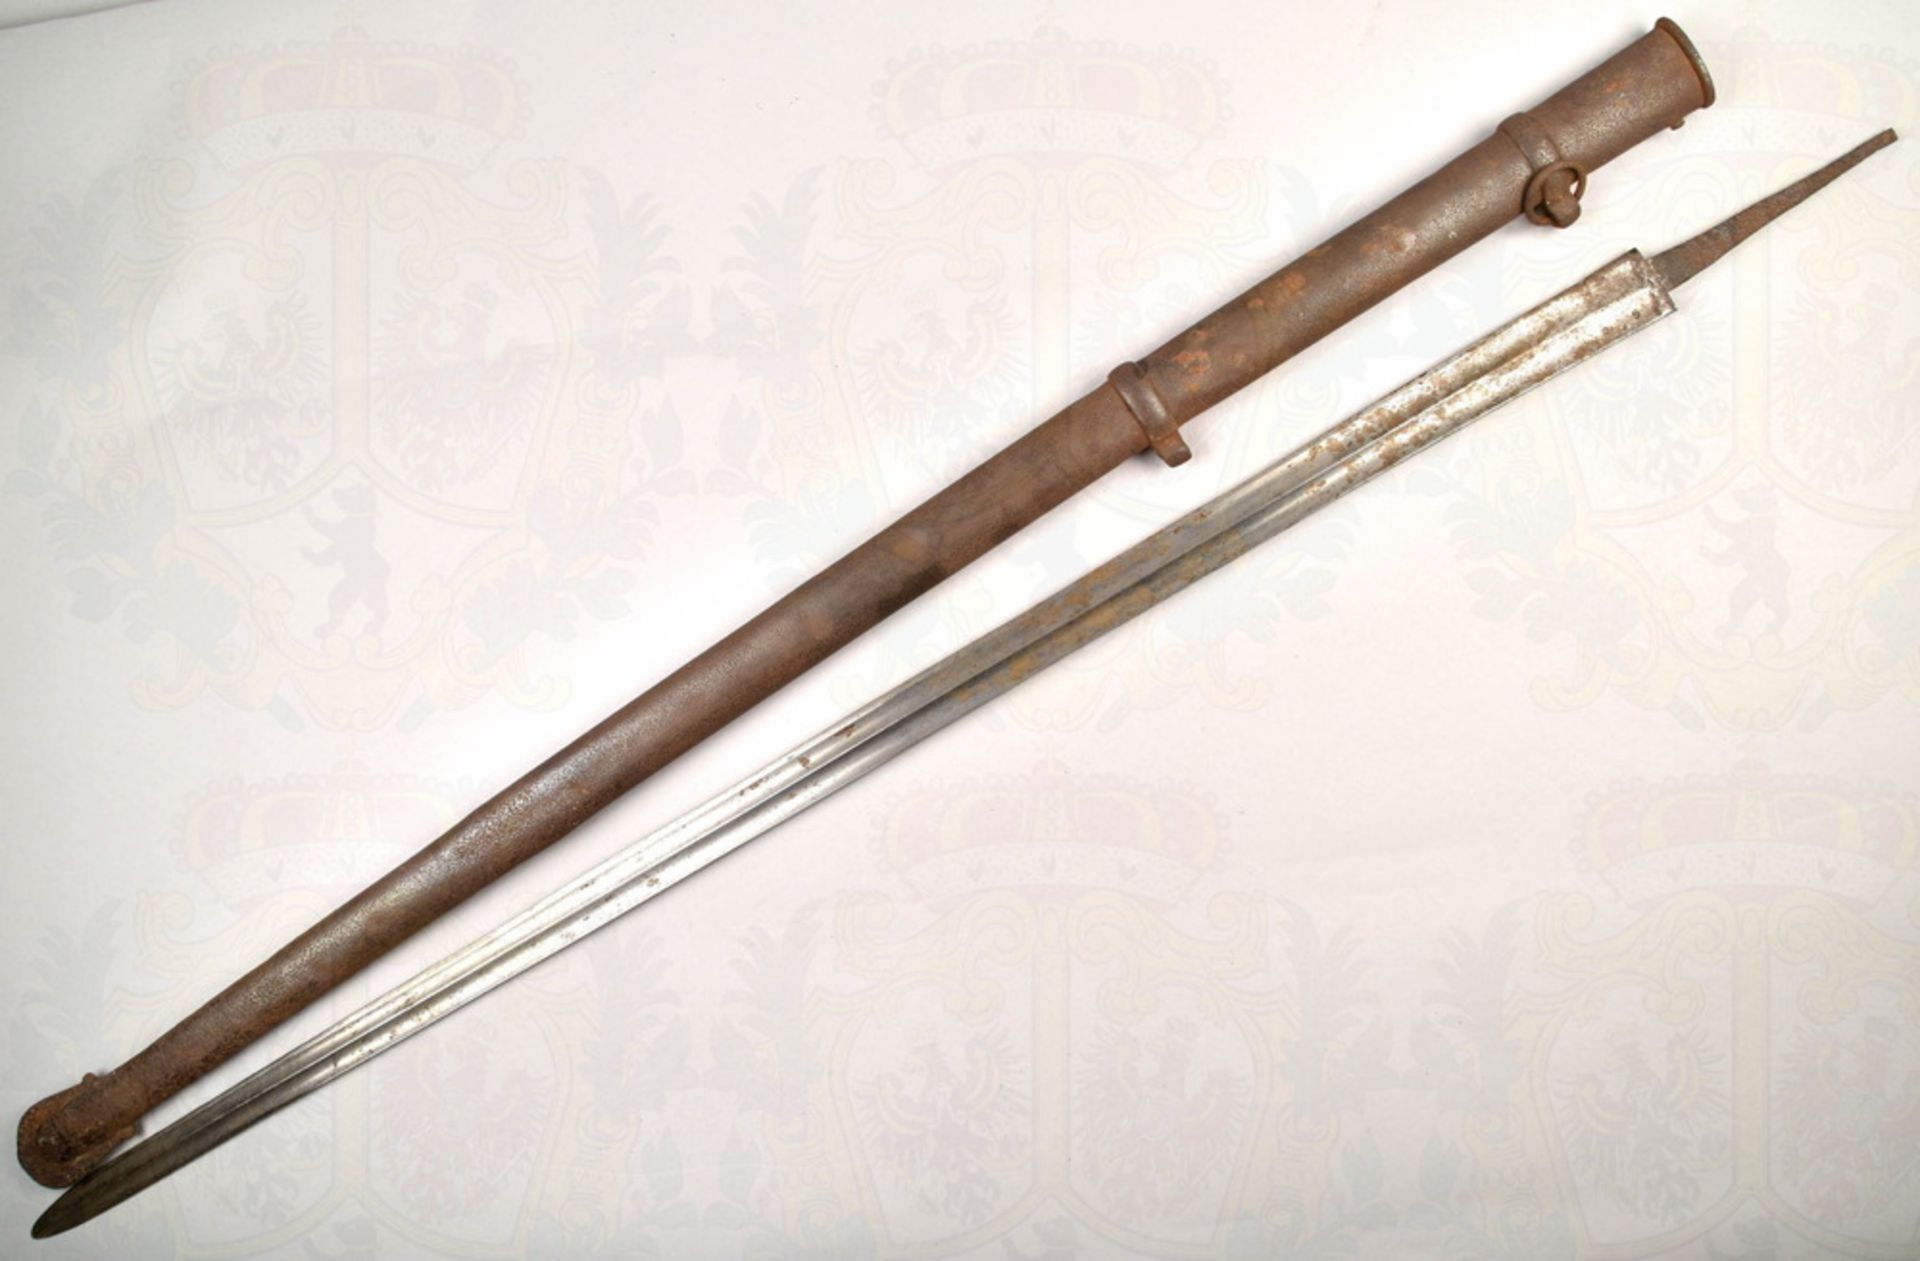 Blade of French backsword with scabbard